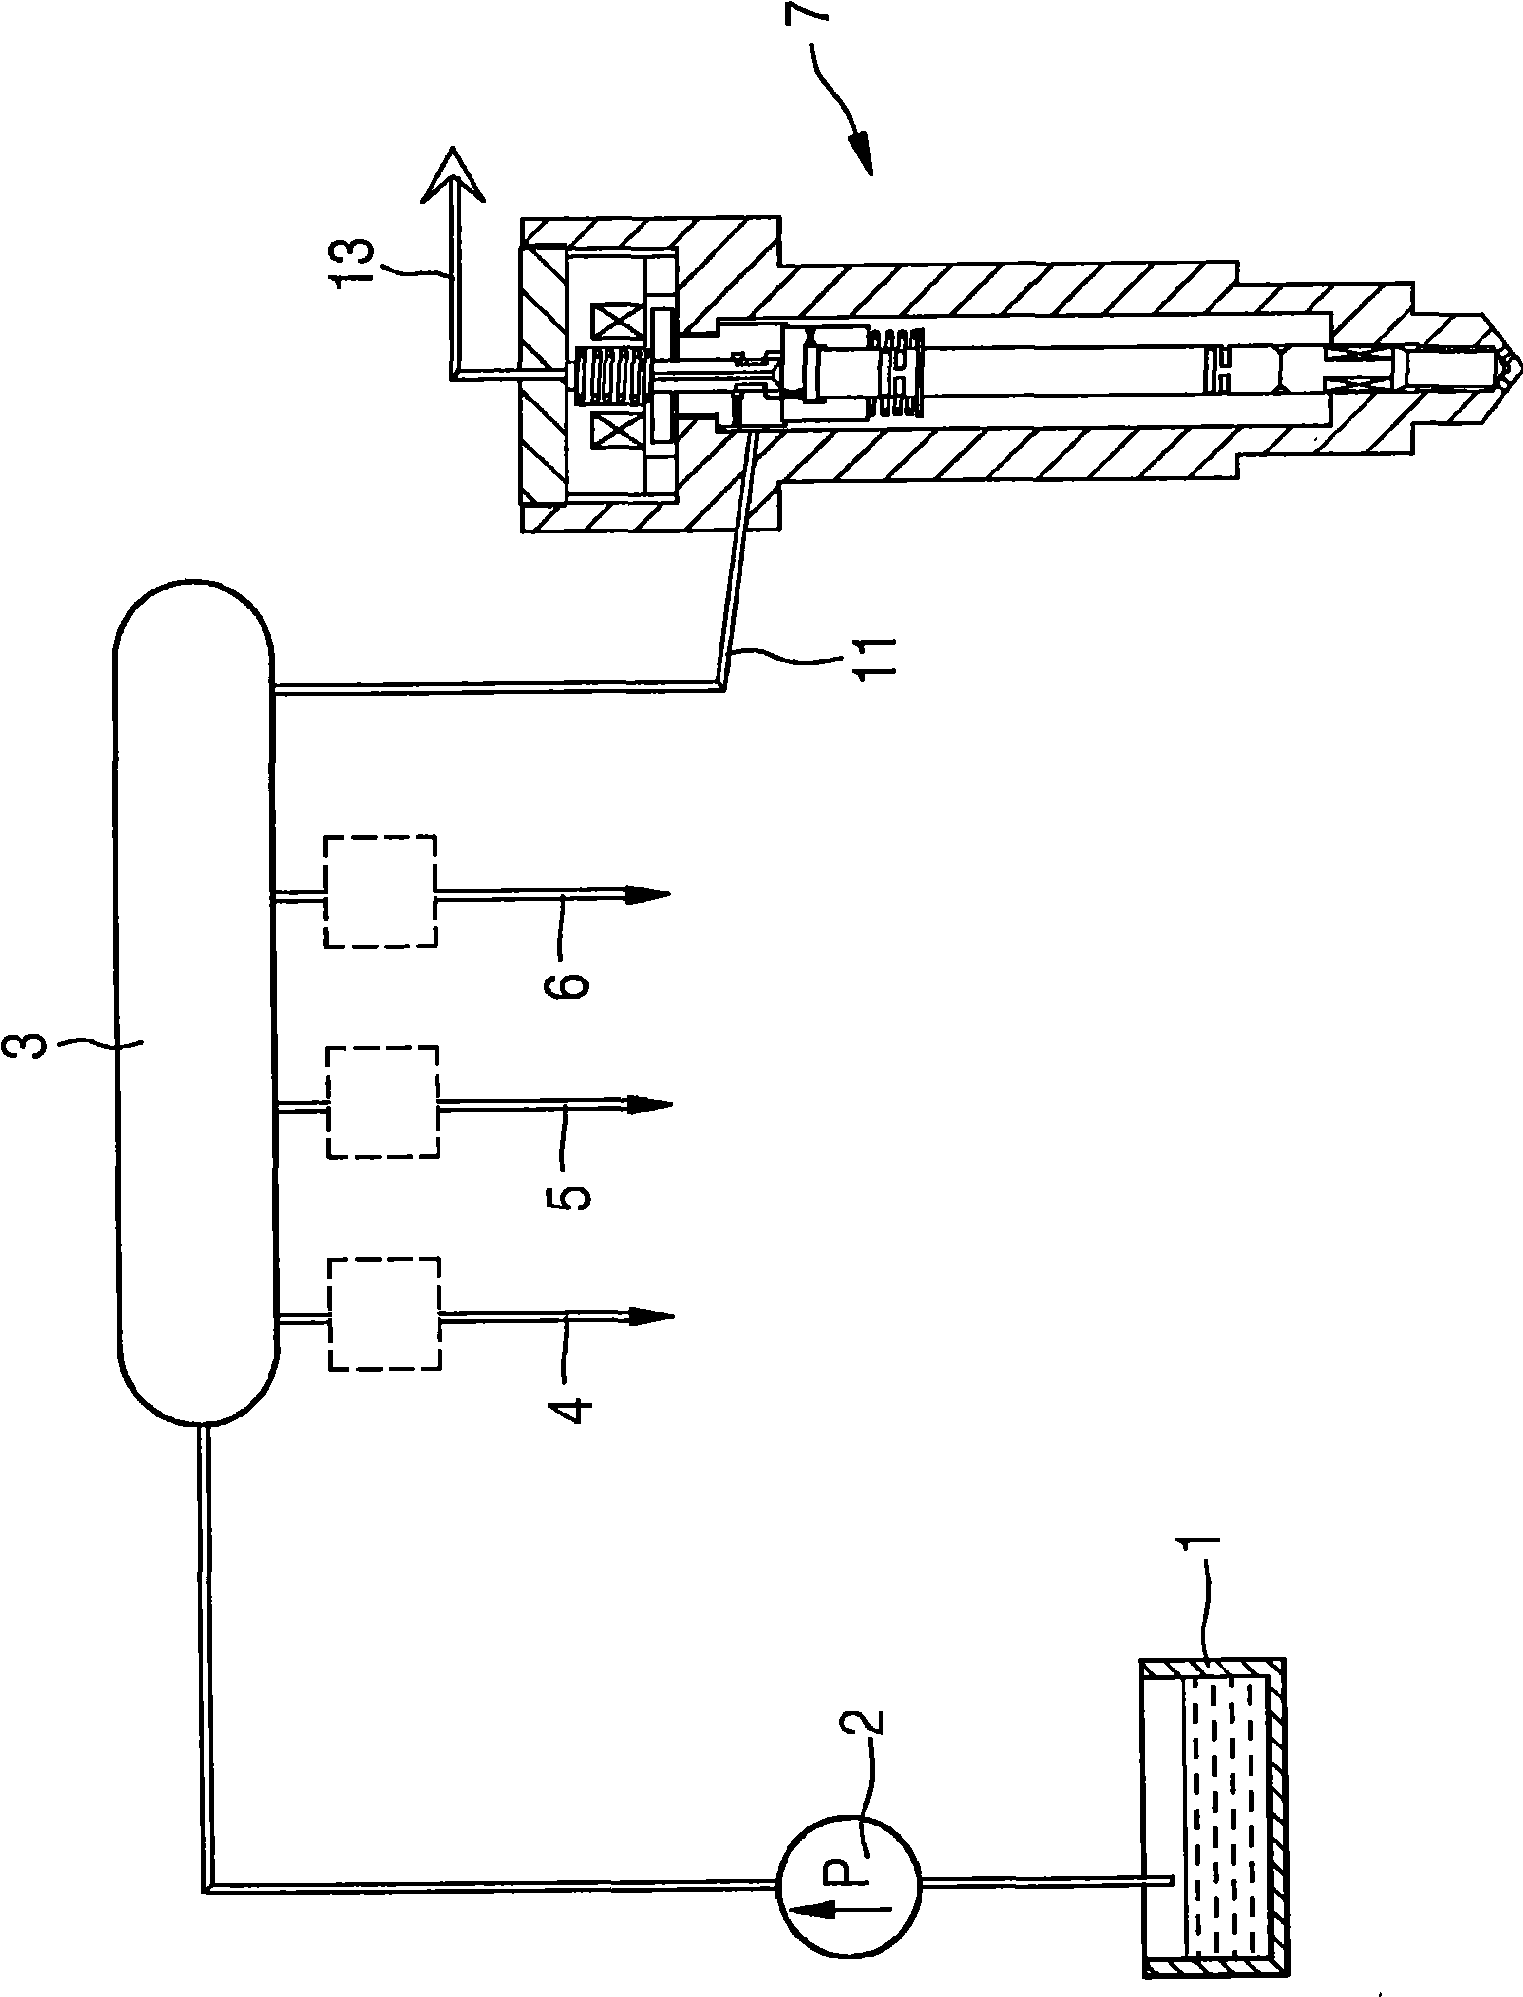 Injector for a fuel injection system